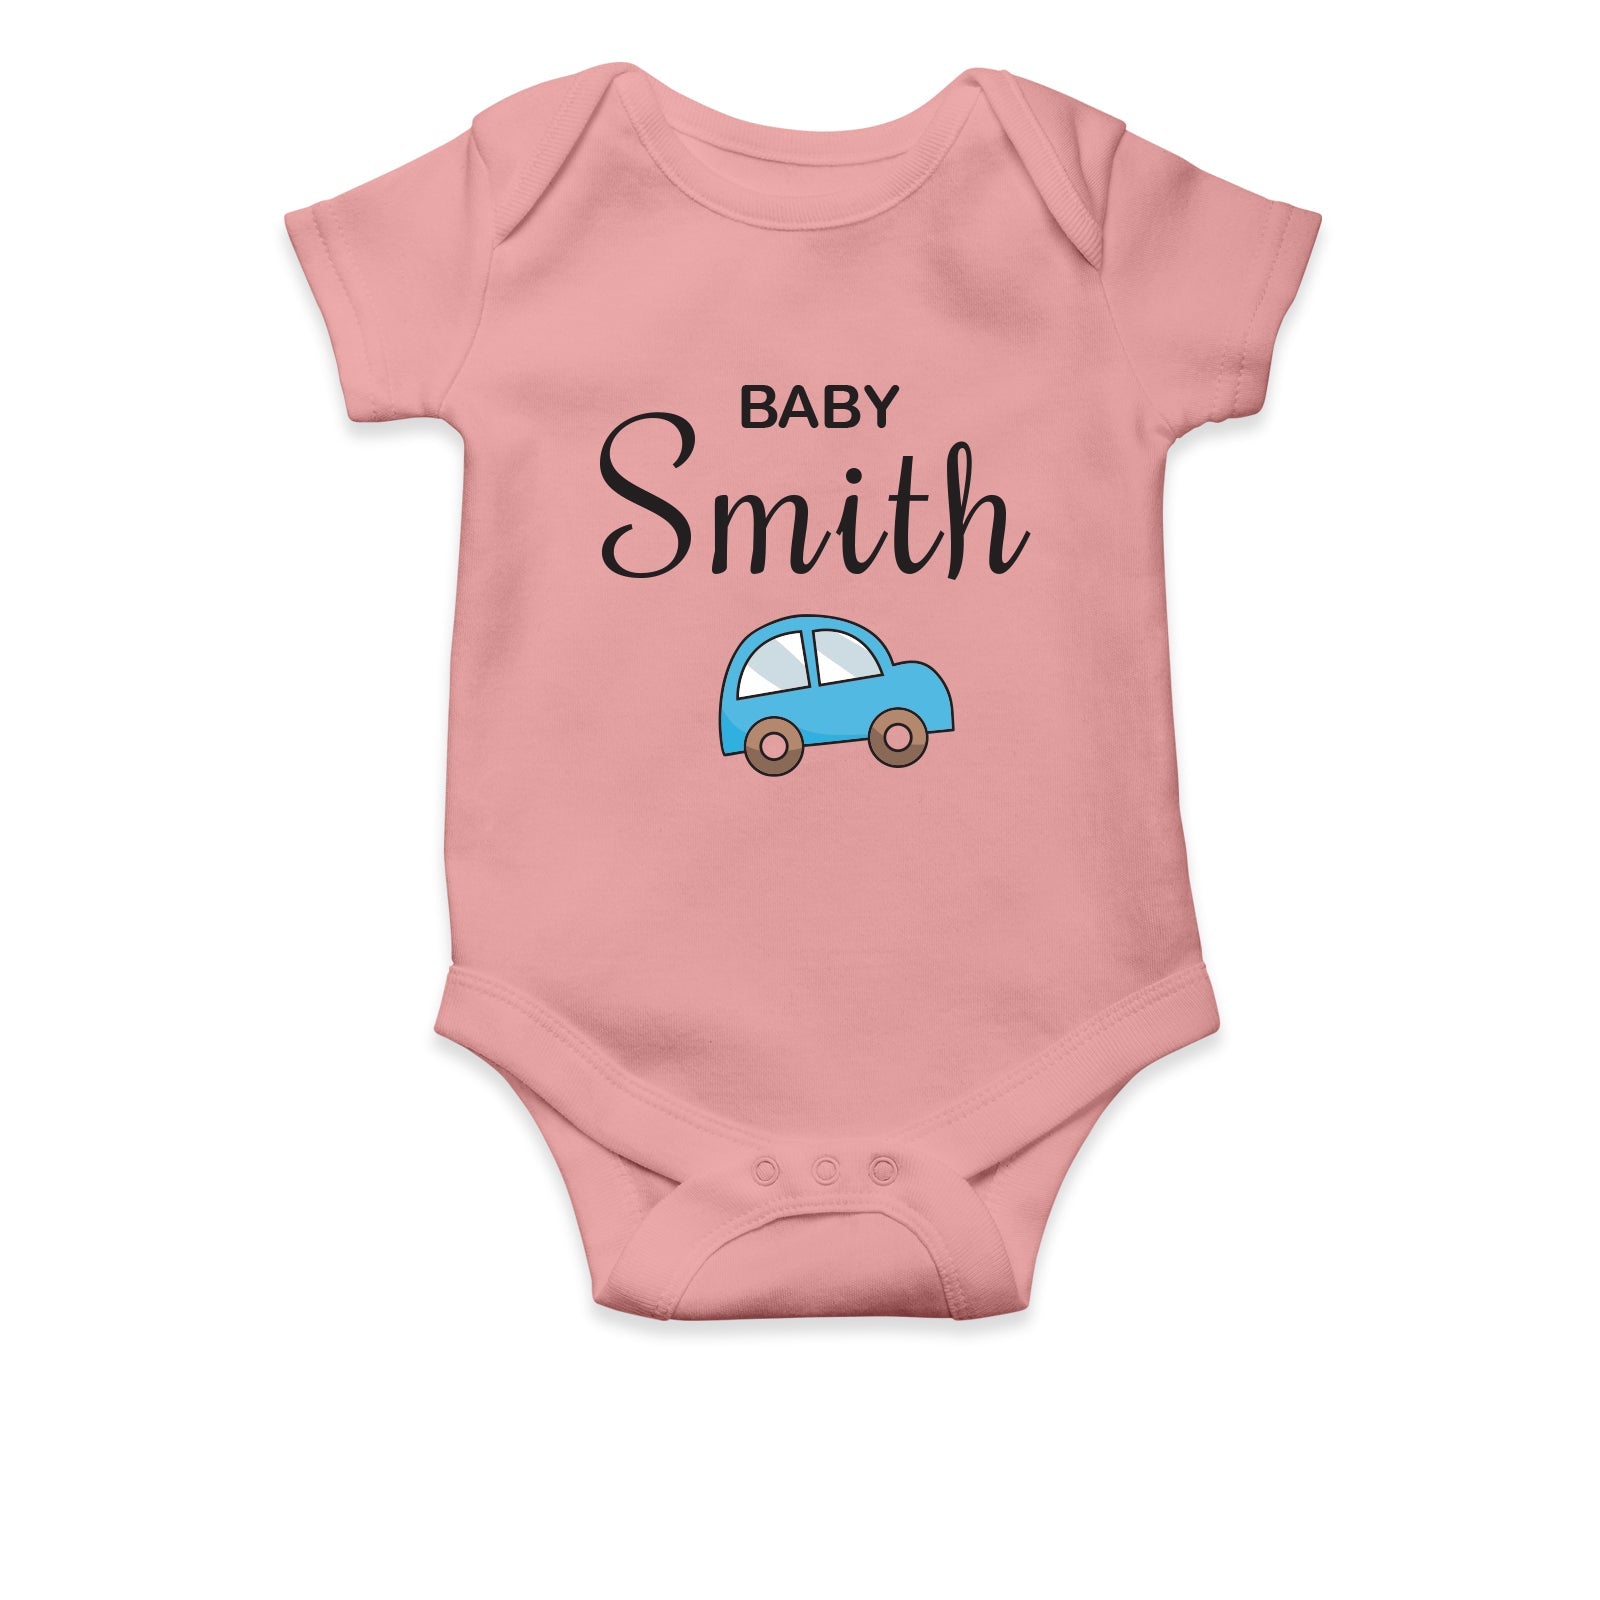 Personalised White Baby Body Suit Grow Vest - Blue Car